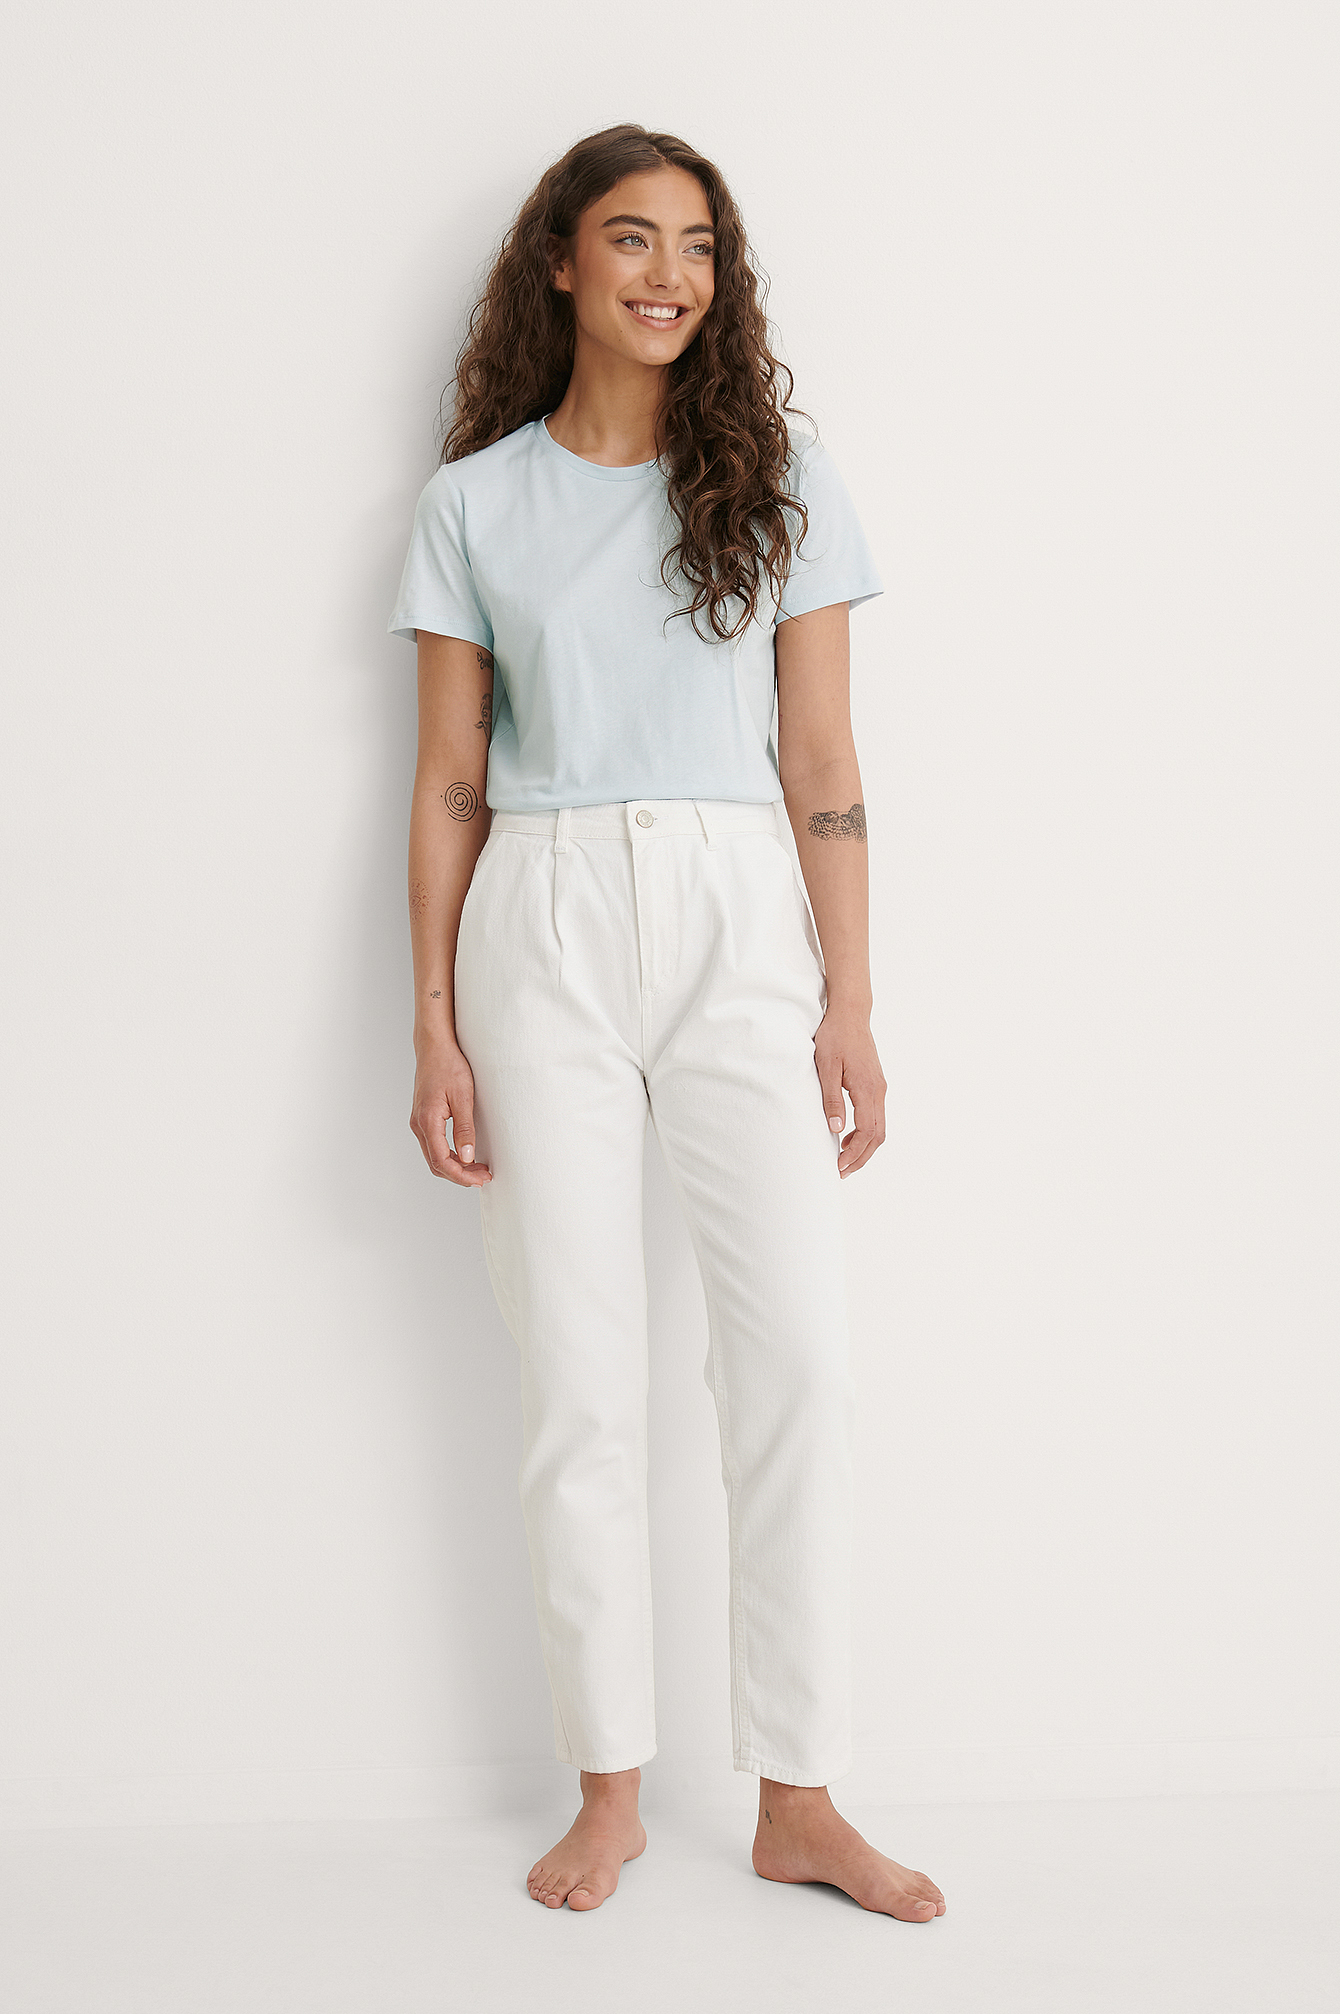 Organic High Waist Pleated Jeans Outfit.